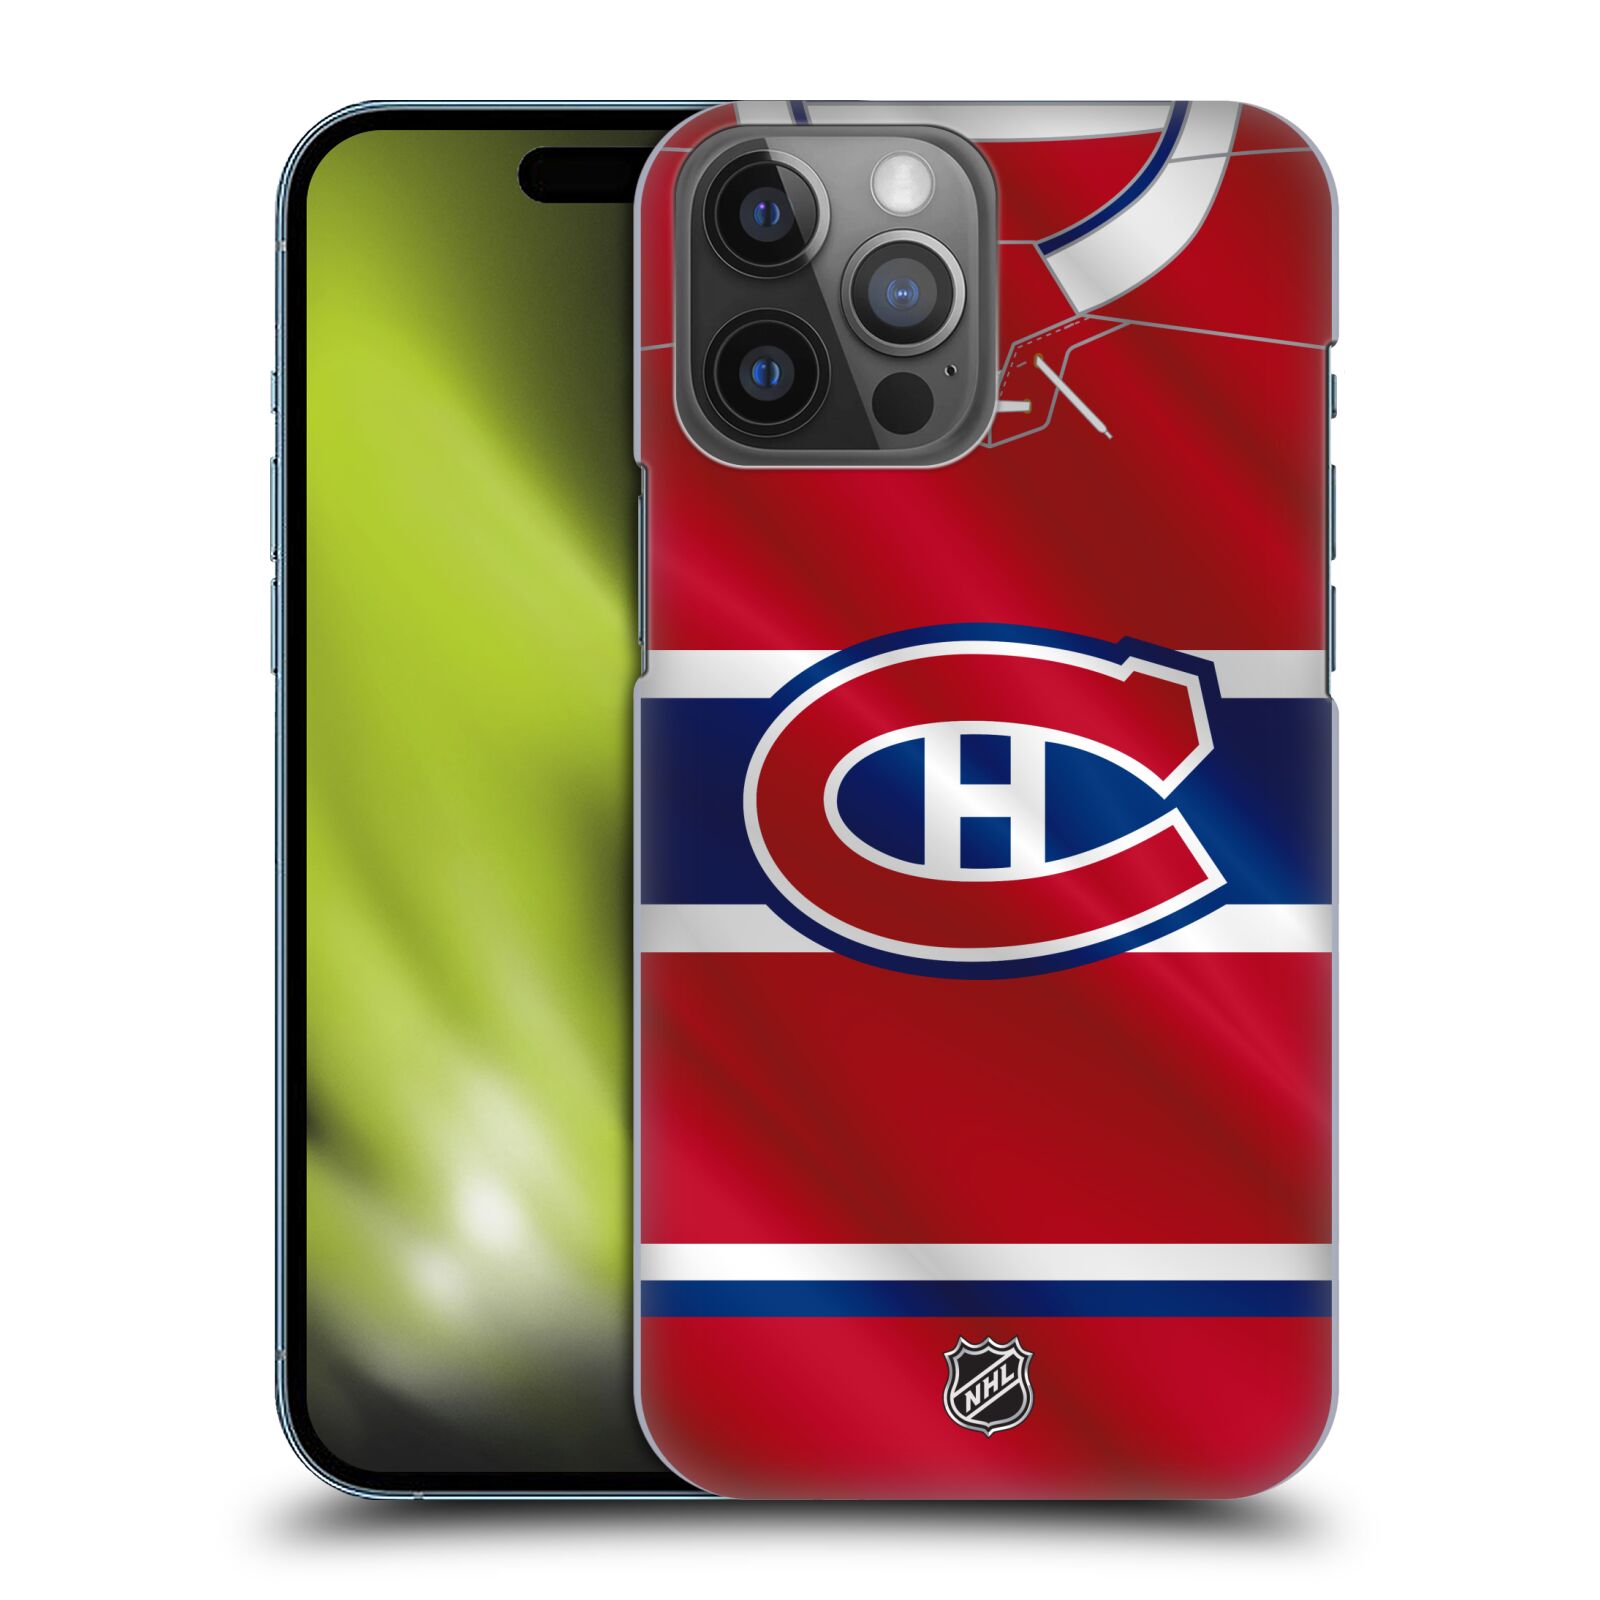 Pouzdro na mobil Apple Iphone 14 PRO MAX - HEAD CASE - Hokej NHL - Montreal Canadiens - Dres